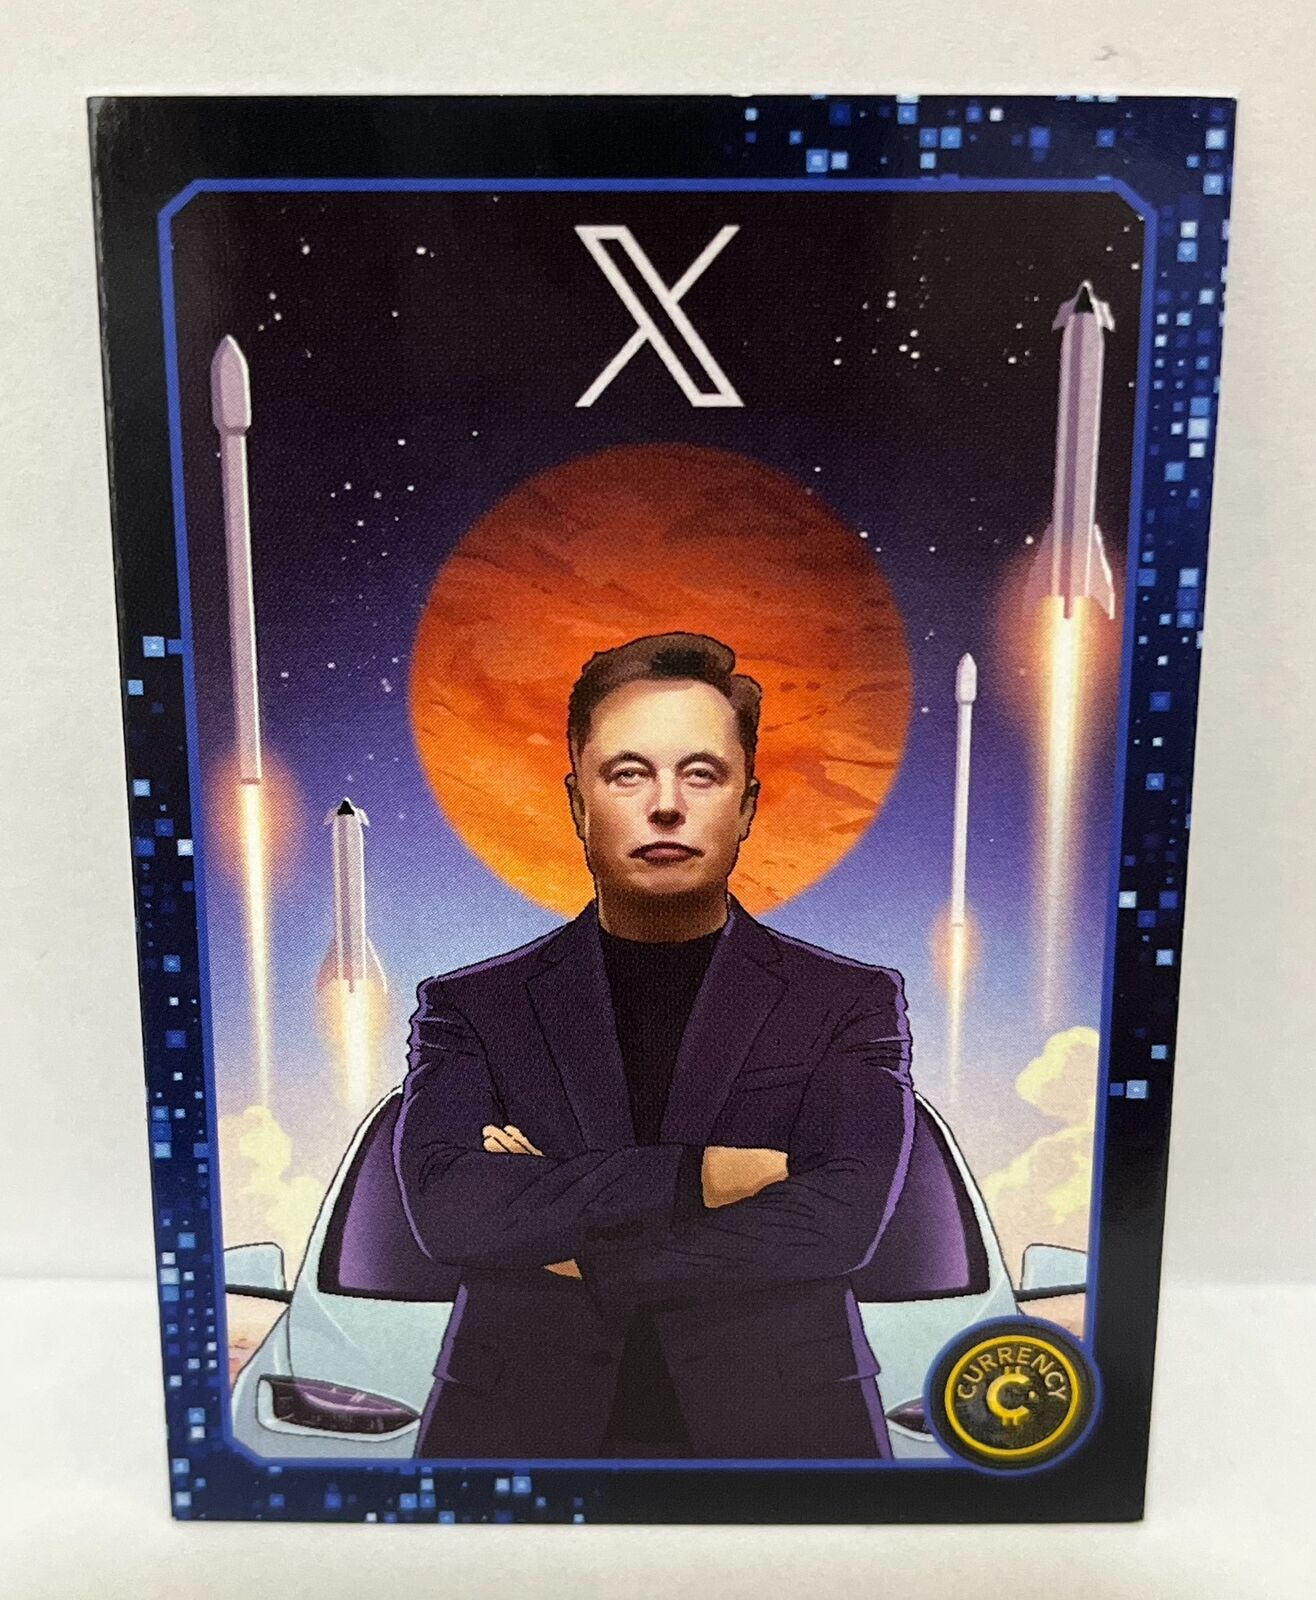 2024 Cardsmiths Currency Series 3 BASE Trading Card #39 / ELON MUSK